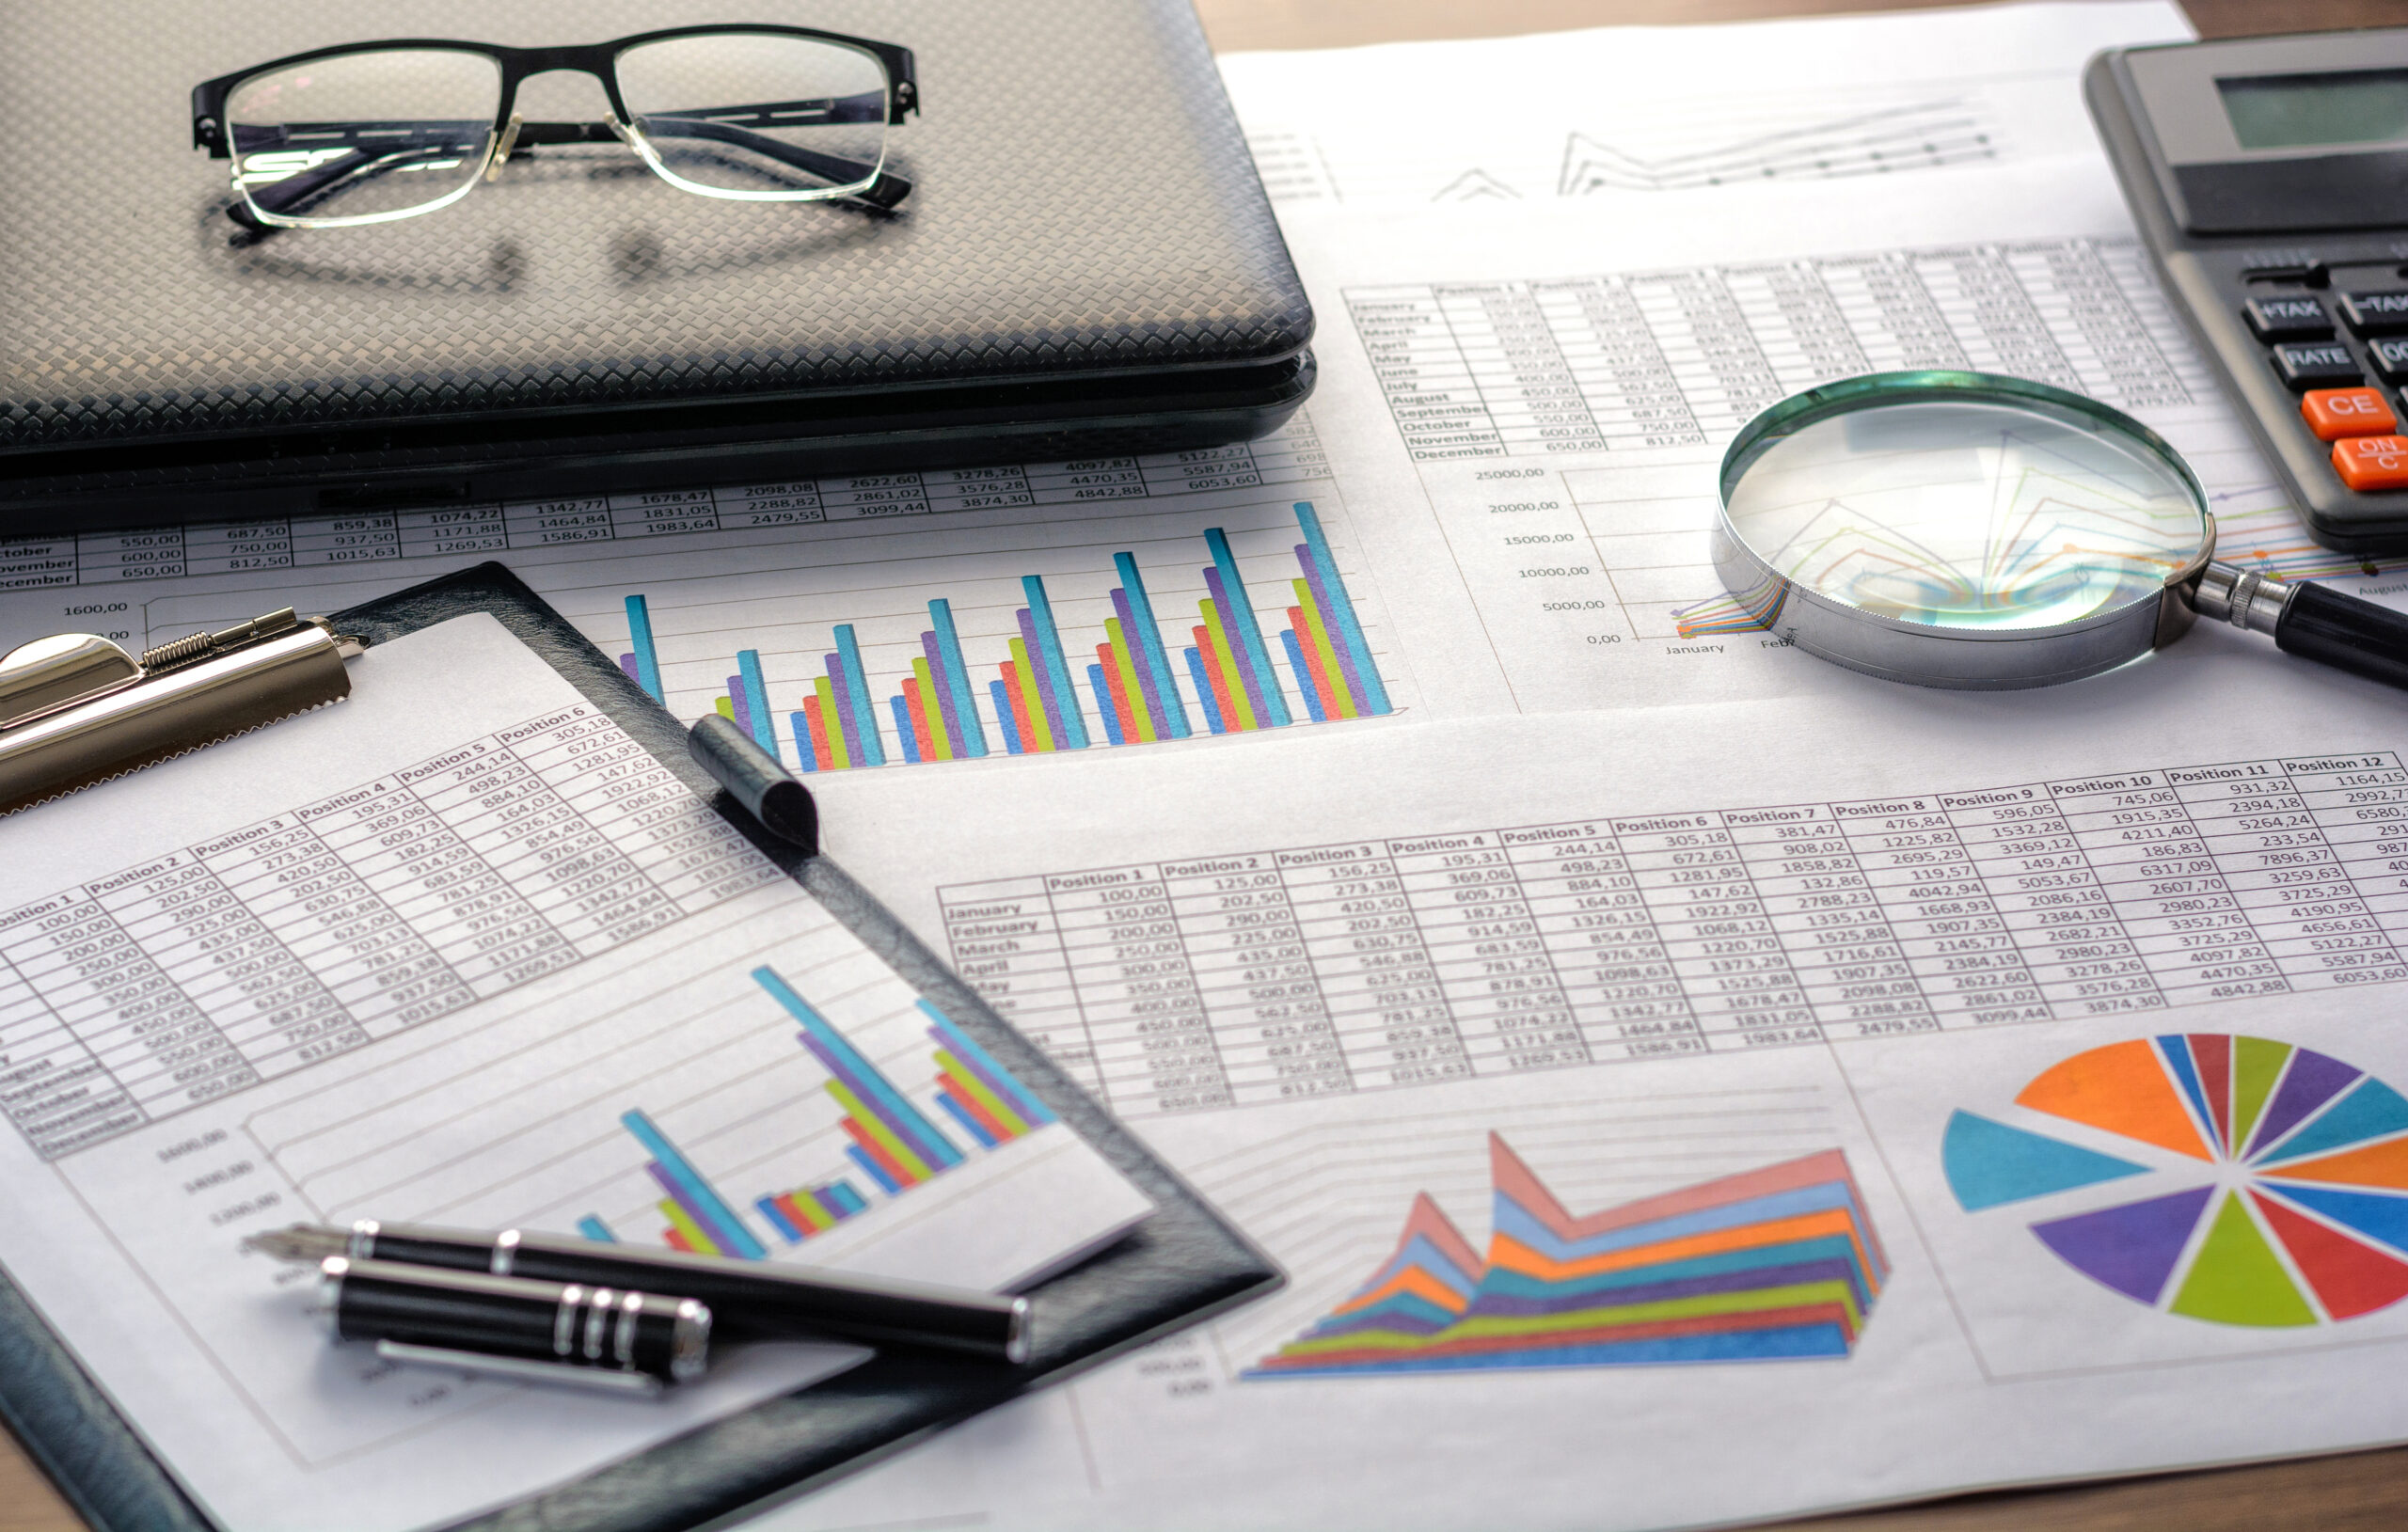 Financial documents - graphics, statistics, drawings, keyboard, laptop, magnifying glass.